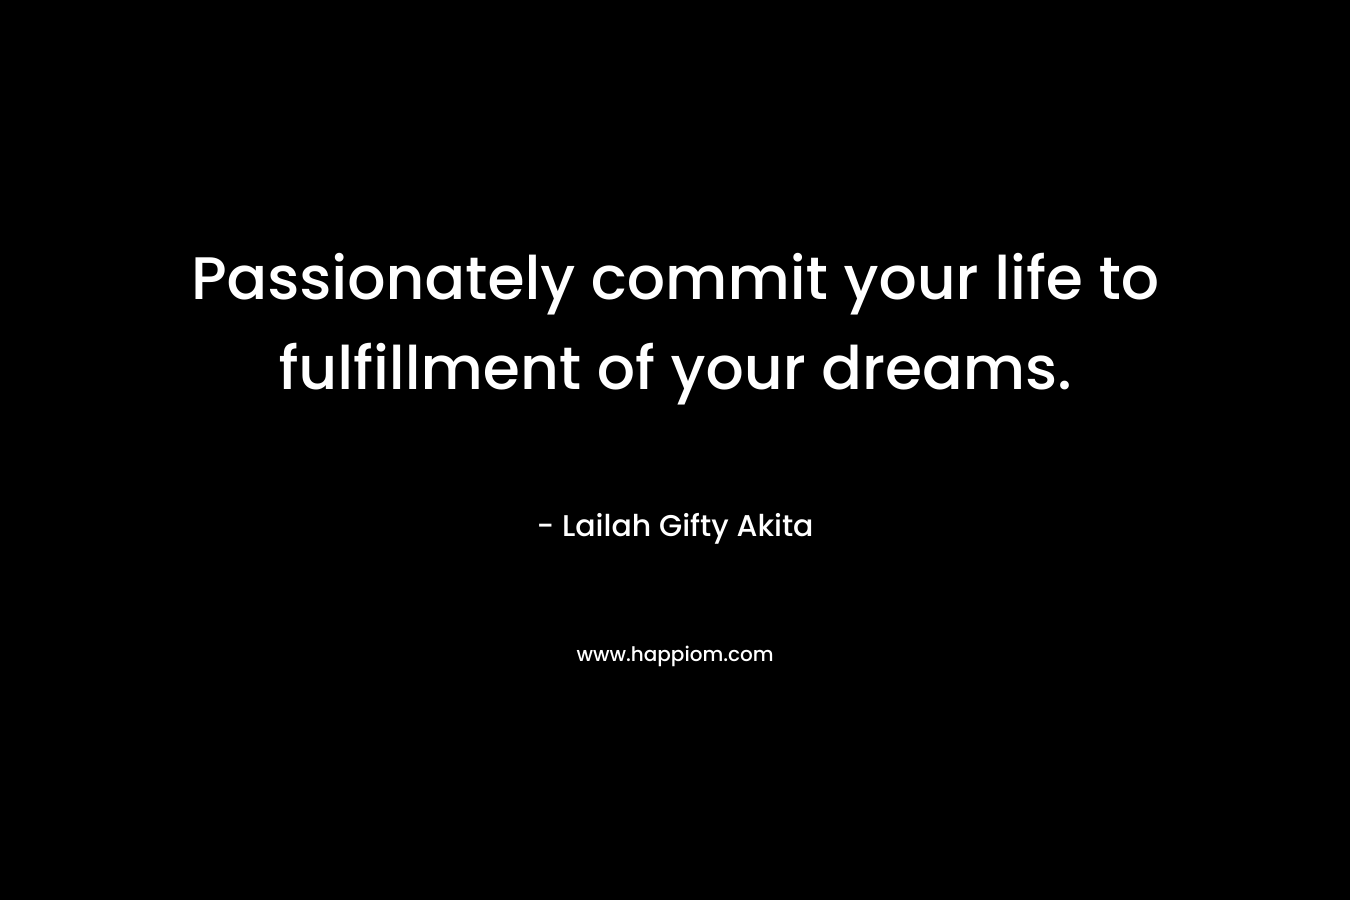 Passionately commit your life to fulfillment of your dreams.